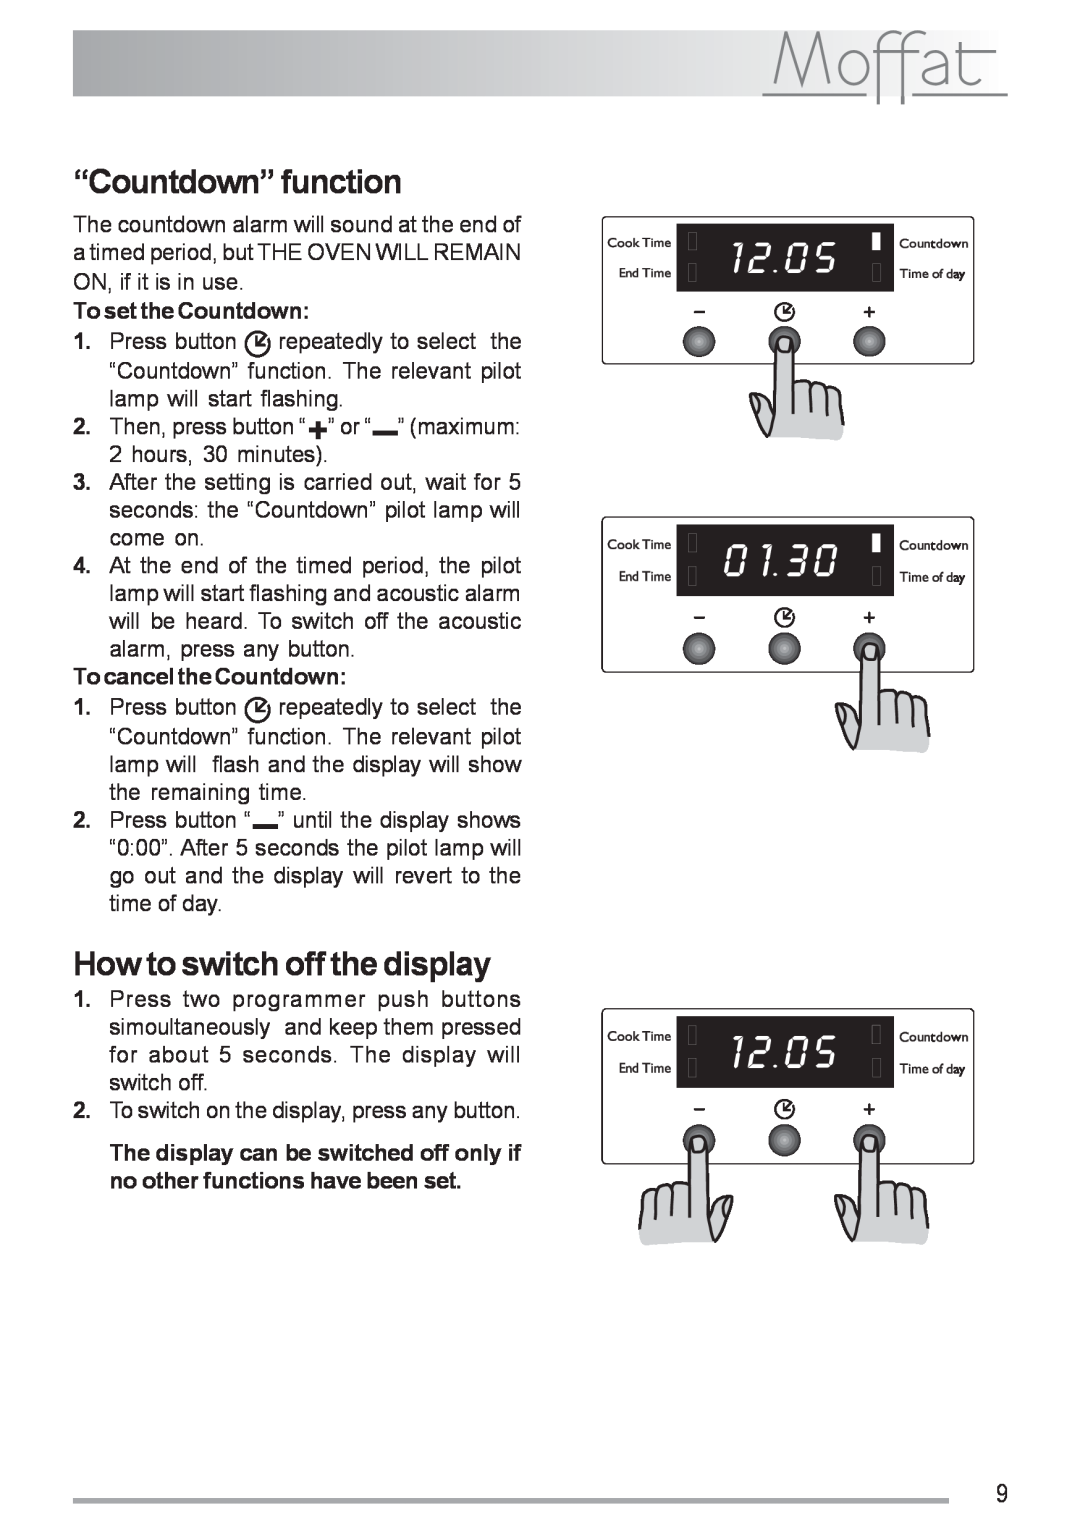 Moffat MSF 616 manual “Countdown” function, How to switch off the display, To set the Countdown, To cancel the Countdown 